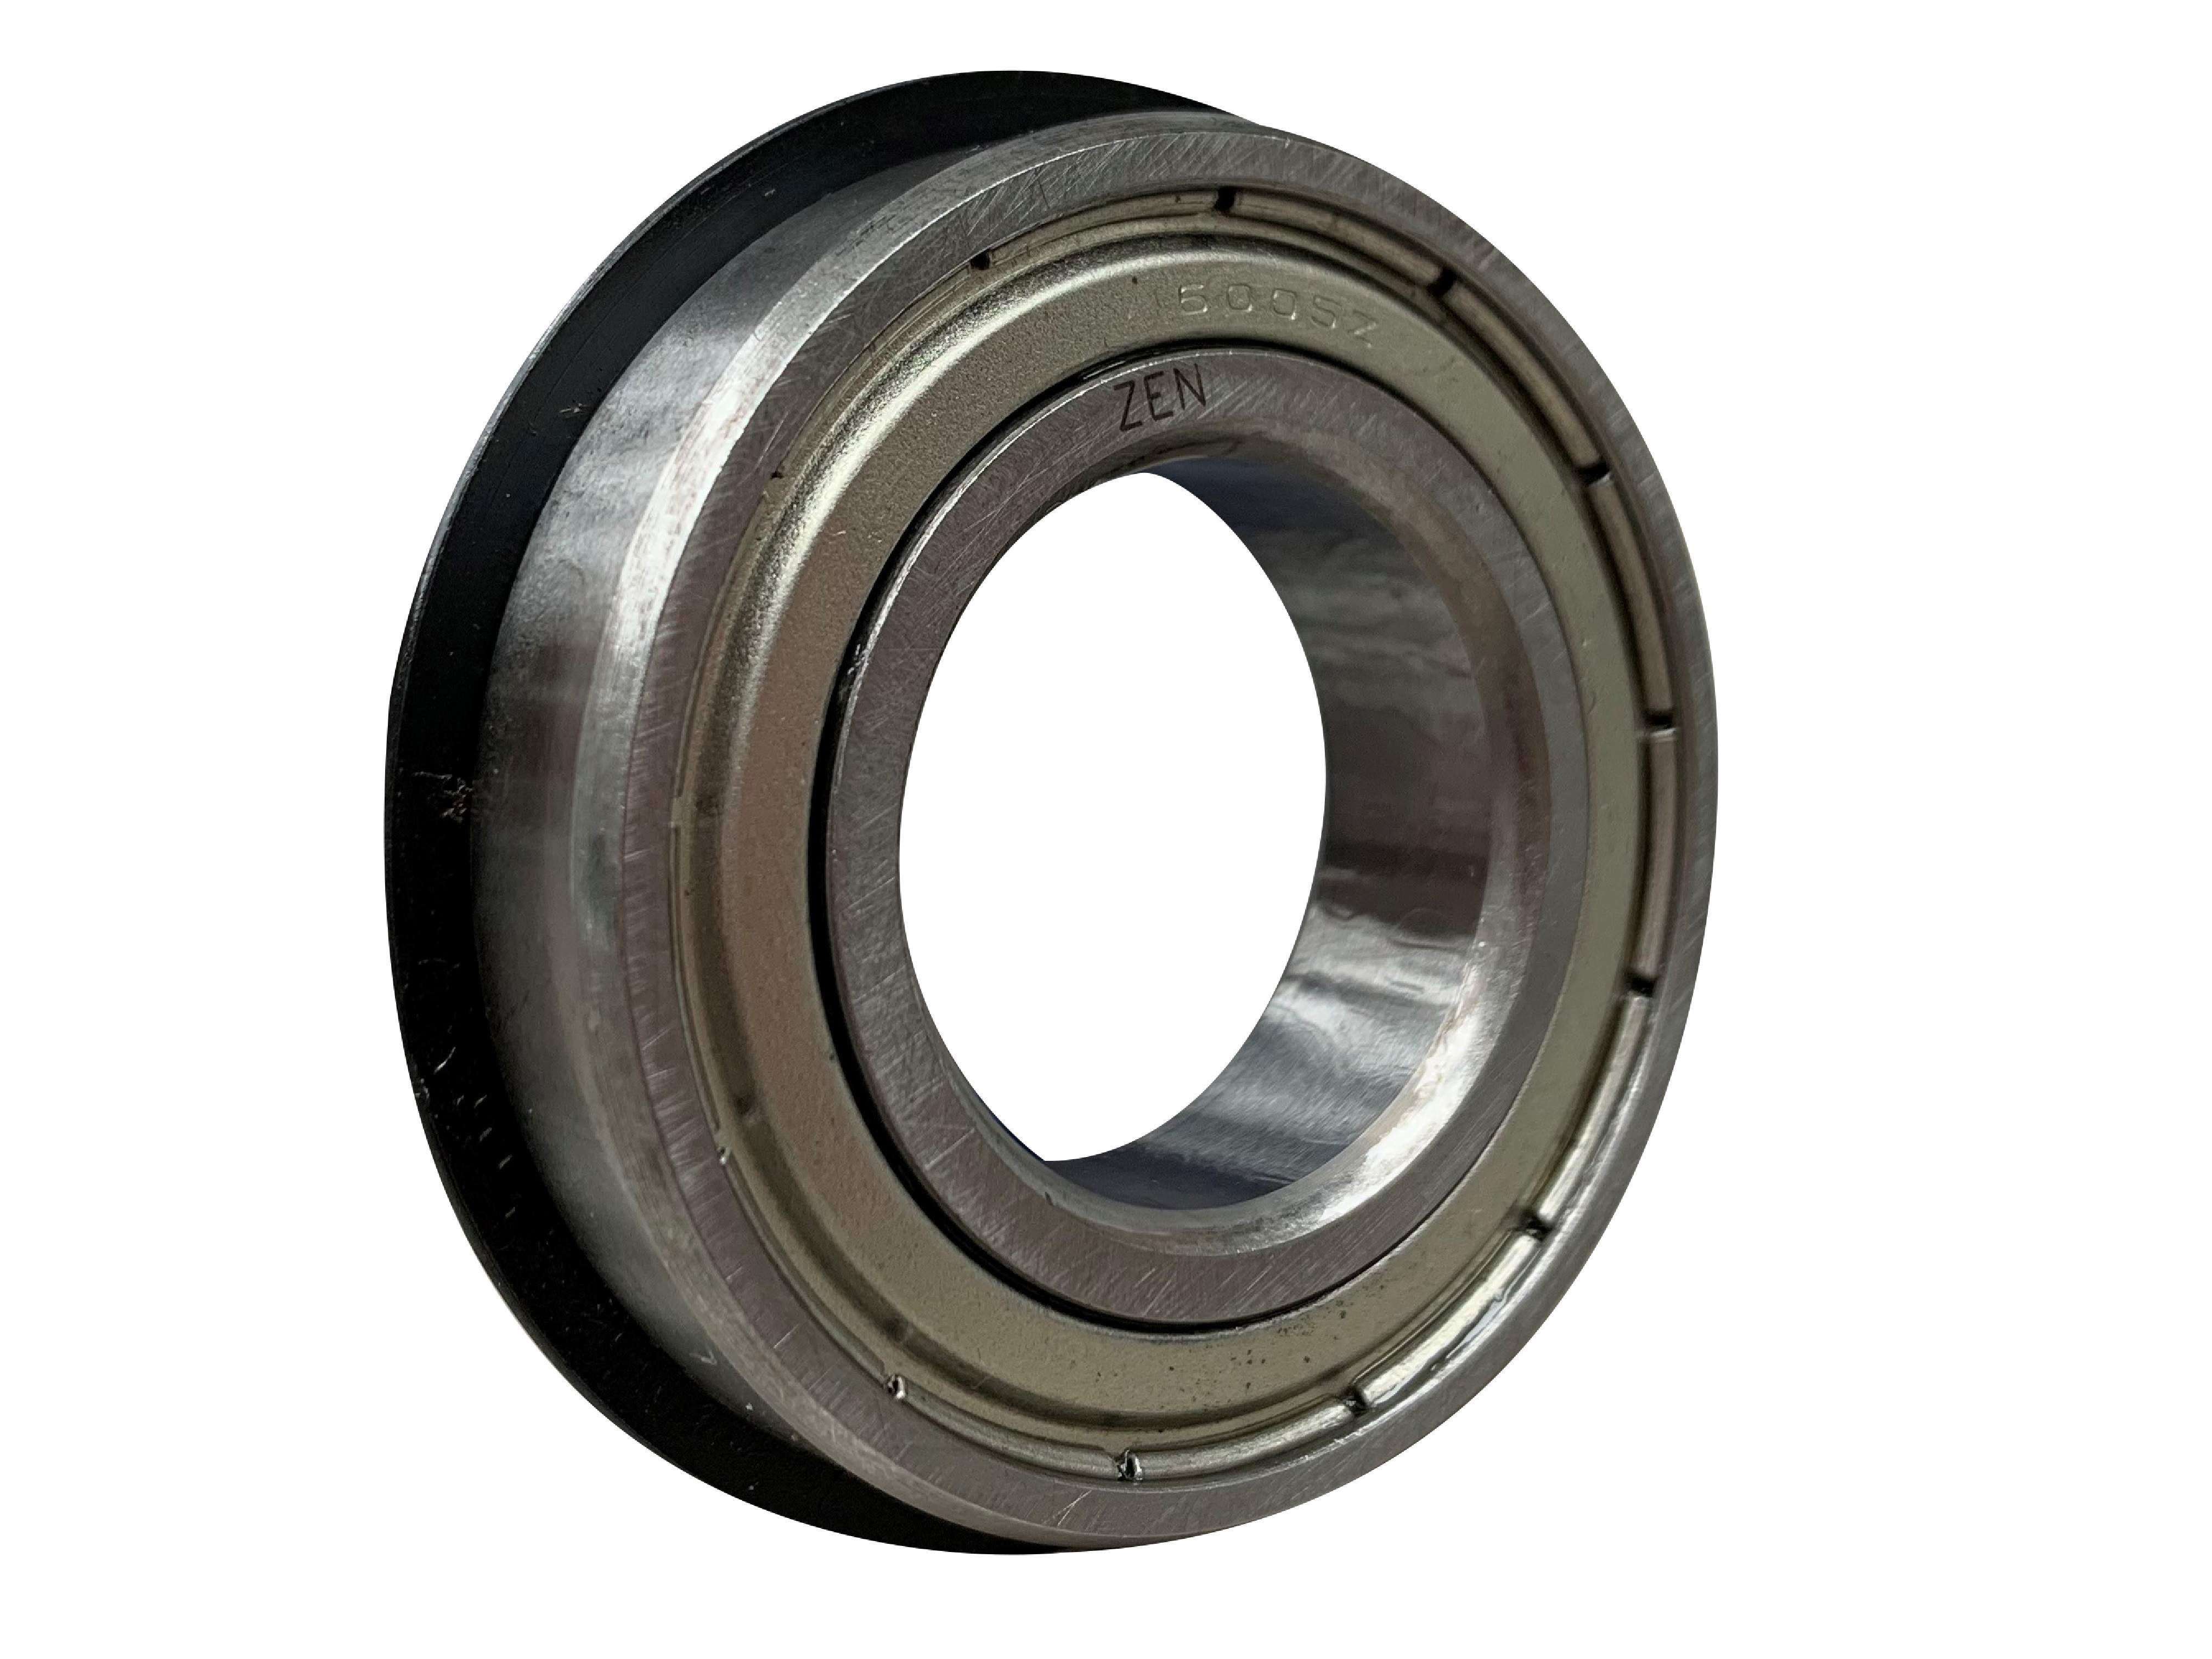 ZEN 6203-2Z-NR Shielded Ball Bearing With Snap Ring 17mm x 40mm x 12mm